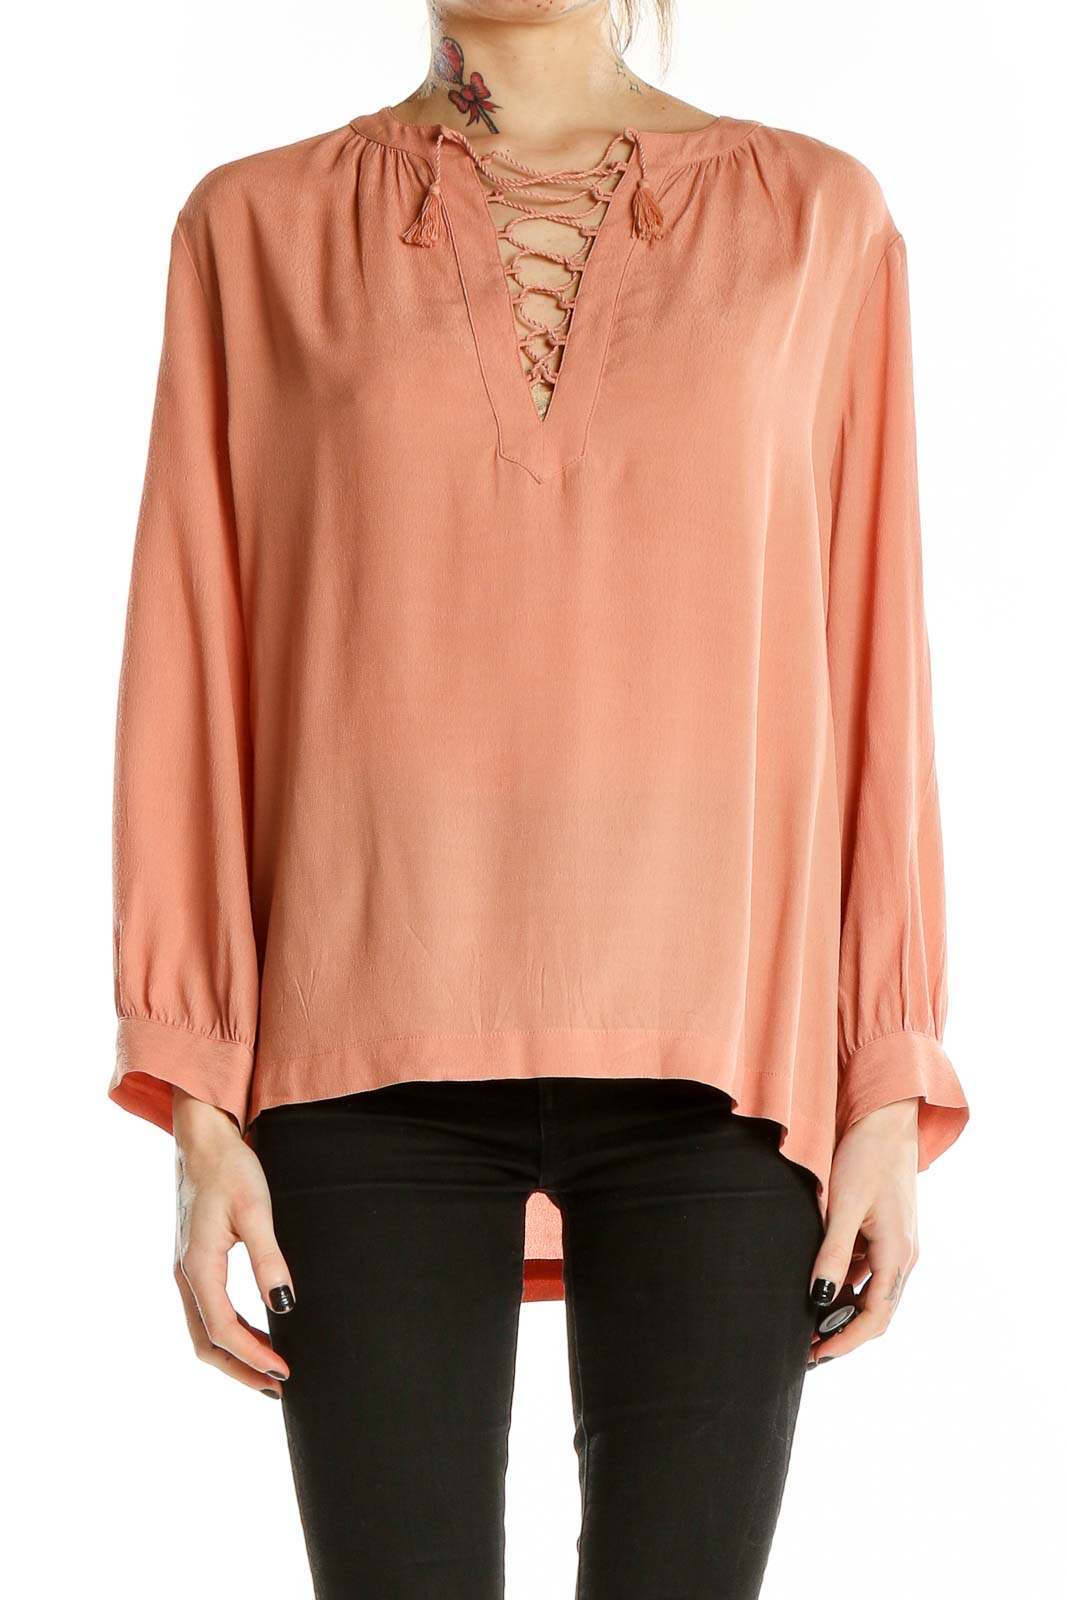 Pink Long Sleeve Lace-Up Blouse Front